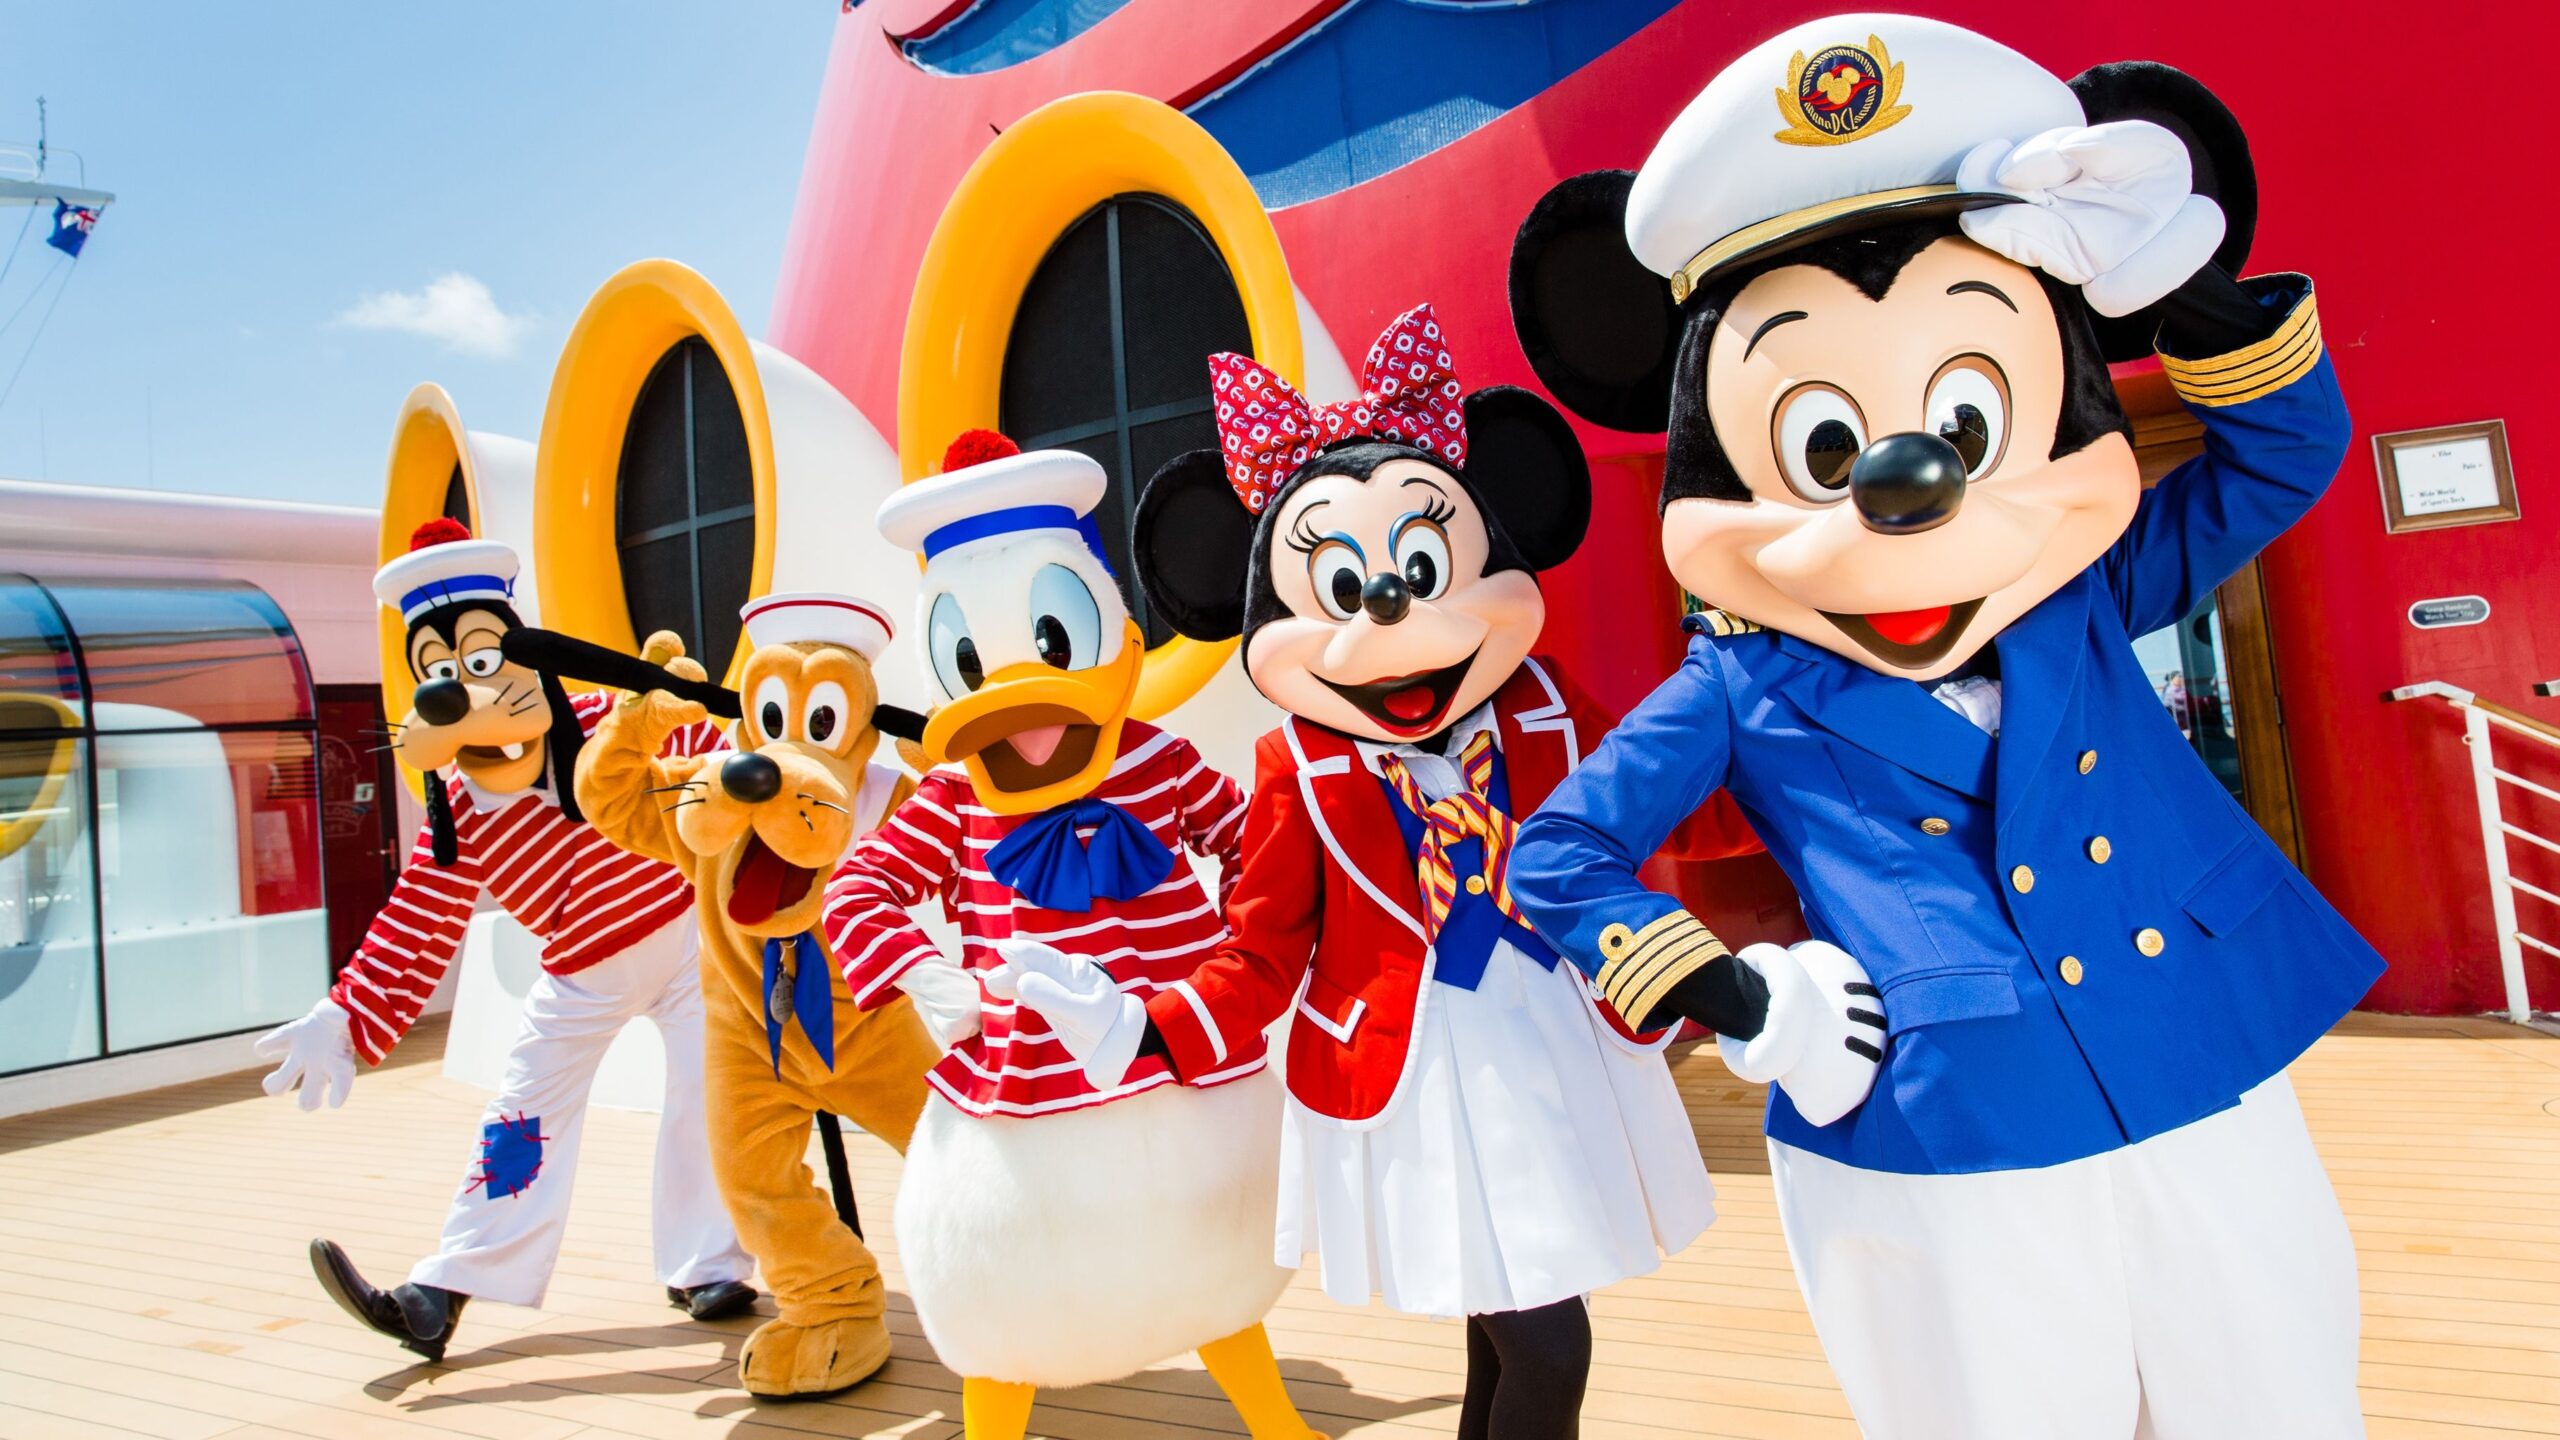 Disney Cruise Line to offer Disney Magic at Sea for UK residents